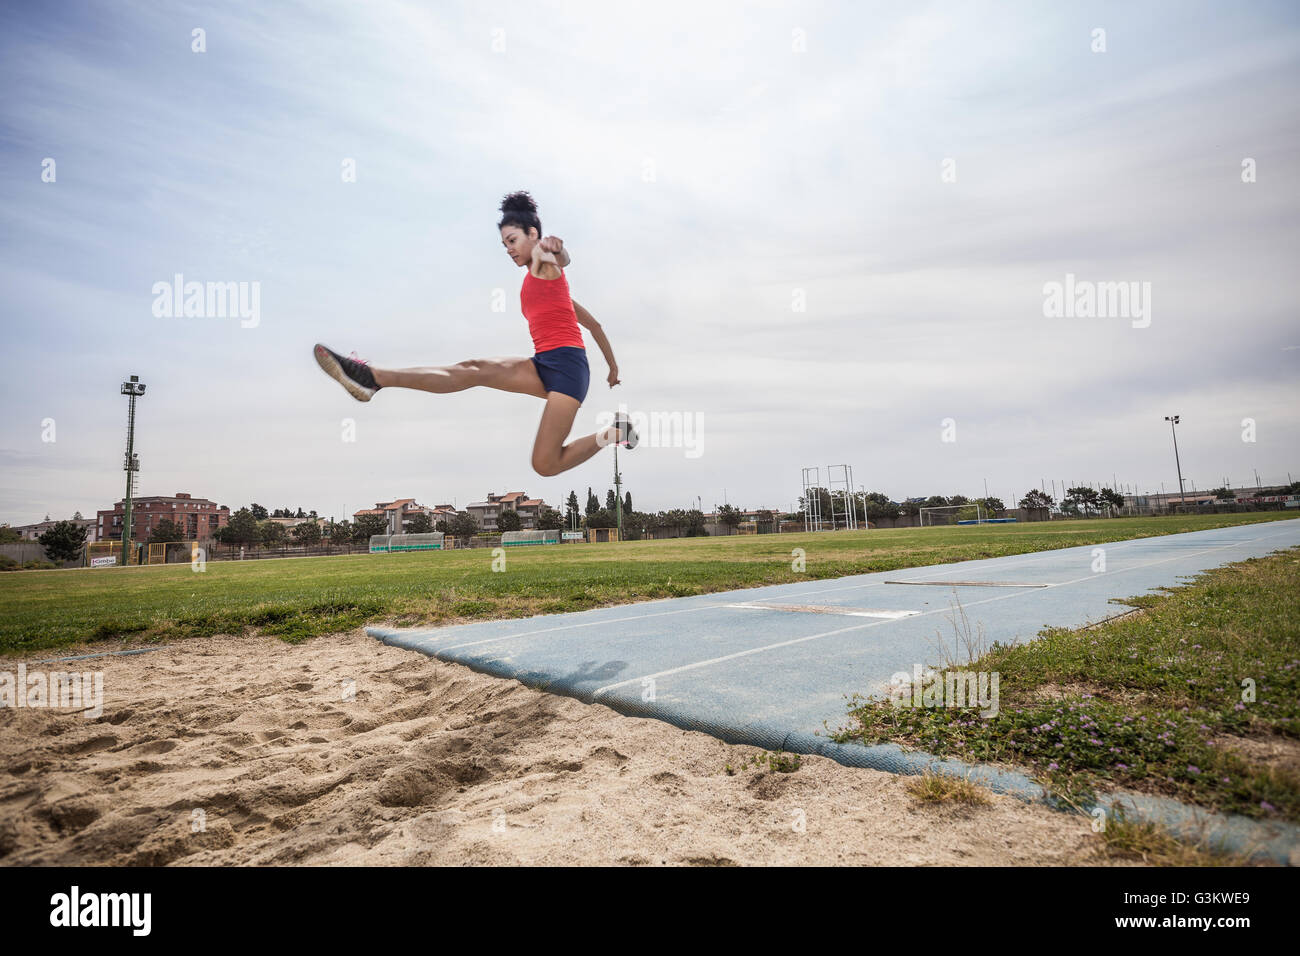 Young female long jumper jumping mid air at sport facility Stock Photo